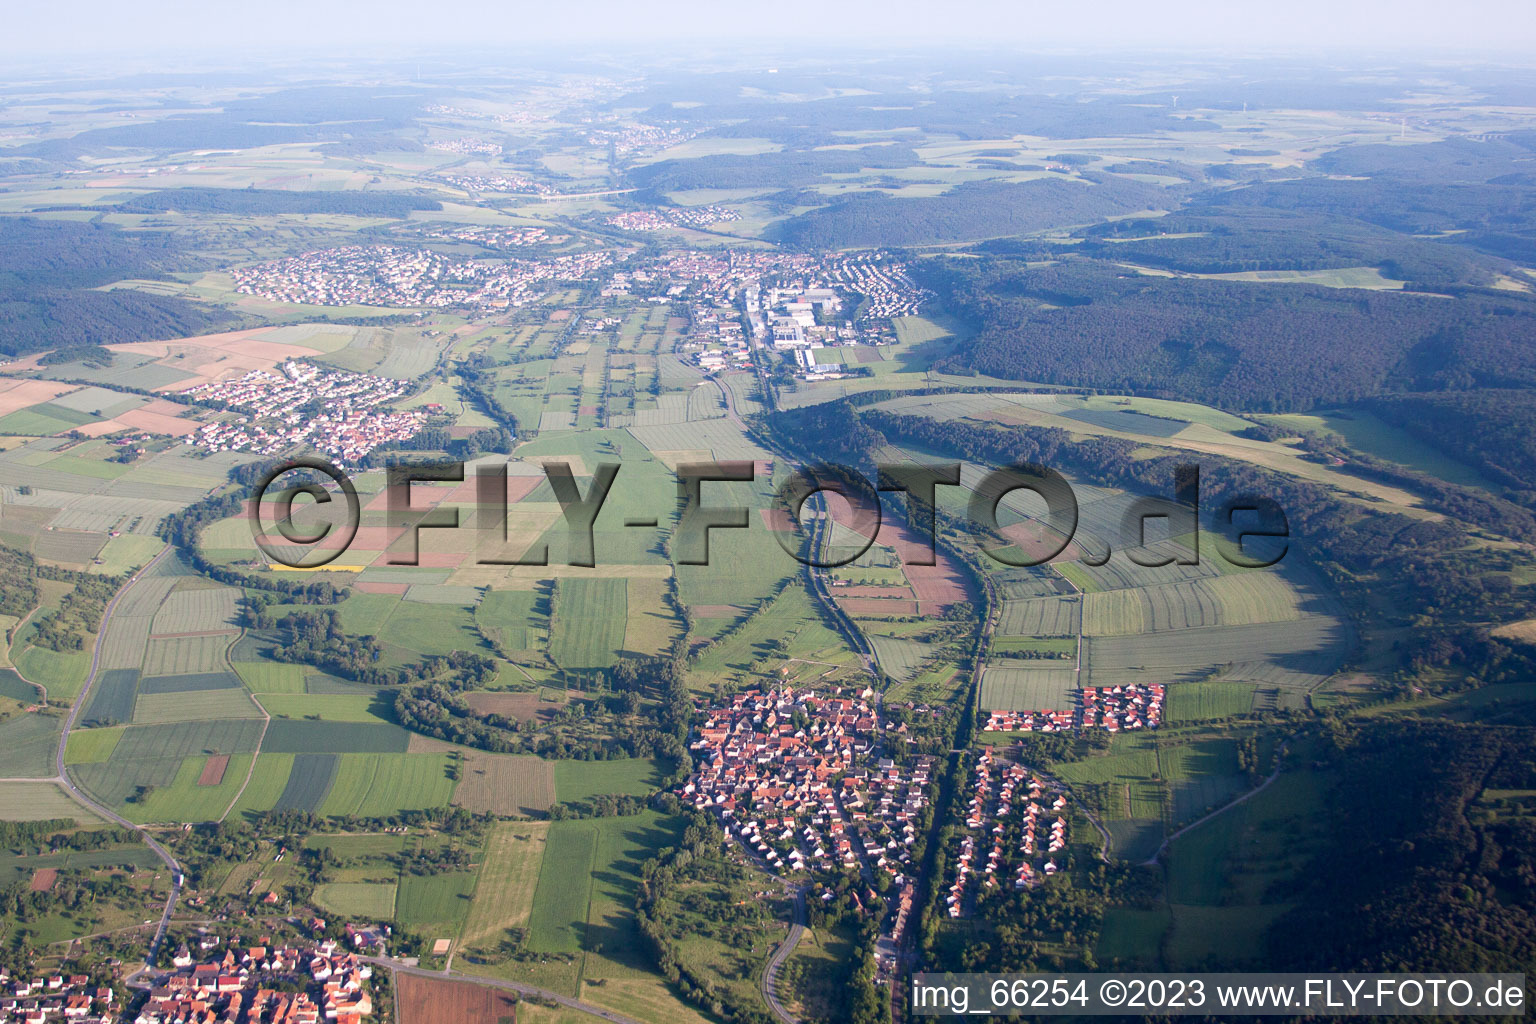 Tauberbischofsheim in the state Baden-Wuerttemberg, Germany seen from above